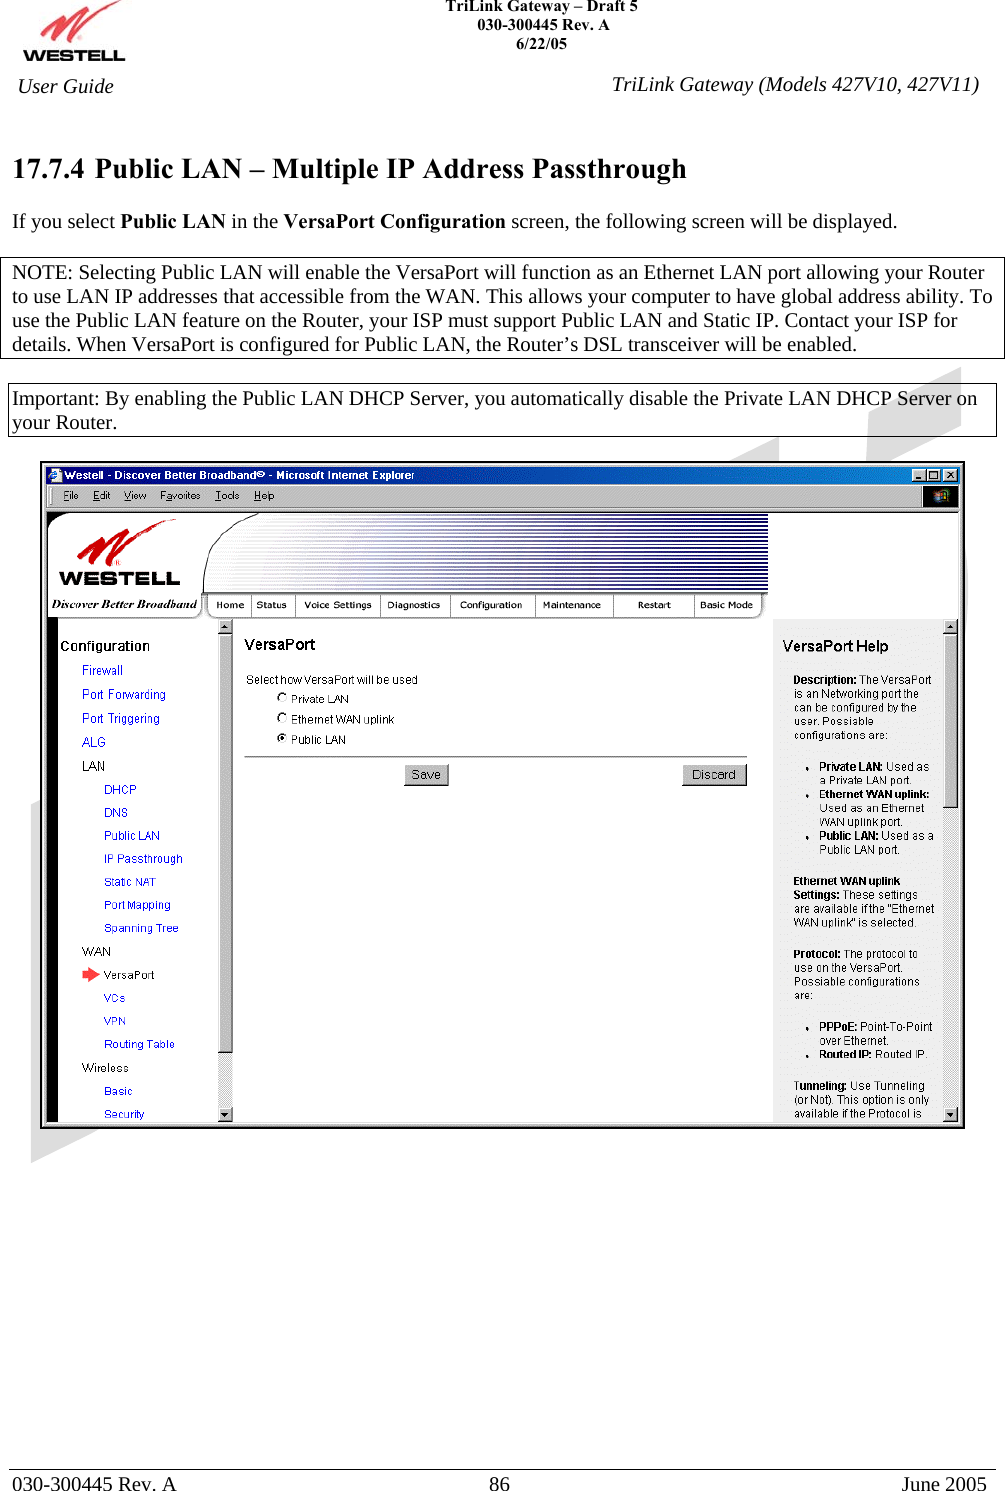    TriLink Gateway – Draft 5   030-300445 Rev. A 6/22/05   030-300445 Rev. A  86  June 2005  User Guide  TriLink Gateway (Models 427V10, 427V11) 17.7.4  Public LAN – Multiple IP Address Passthrough  If you select Public LAN in the VersaPort Configuration screen, the following screen will be displayed.   NOTE: Selecting Public LAN will enable the VersaPort will function as an Ethernet LAN port allowing your Router to use LAN IP addresses that accessible from the WAN. This allows your computer to have global address ability. To use the Public LAN feature on the Router, your ISP must support Public LAN and Static IP. Contact your ISP for details. When VersaPort is configured for Public LAN, the Router’s DSL transceiver will be enabled.  Important: By enabling the Public LAN DHCP Server, you automatically disable the Private LAN DHCP Server on your Router.               